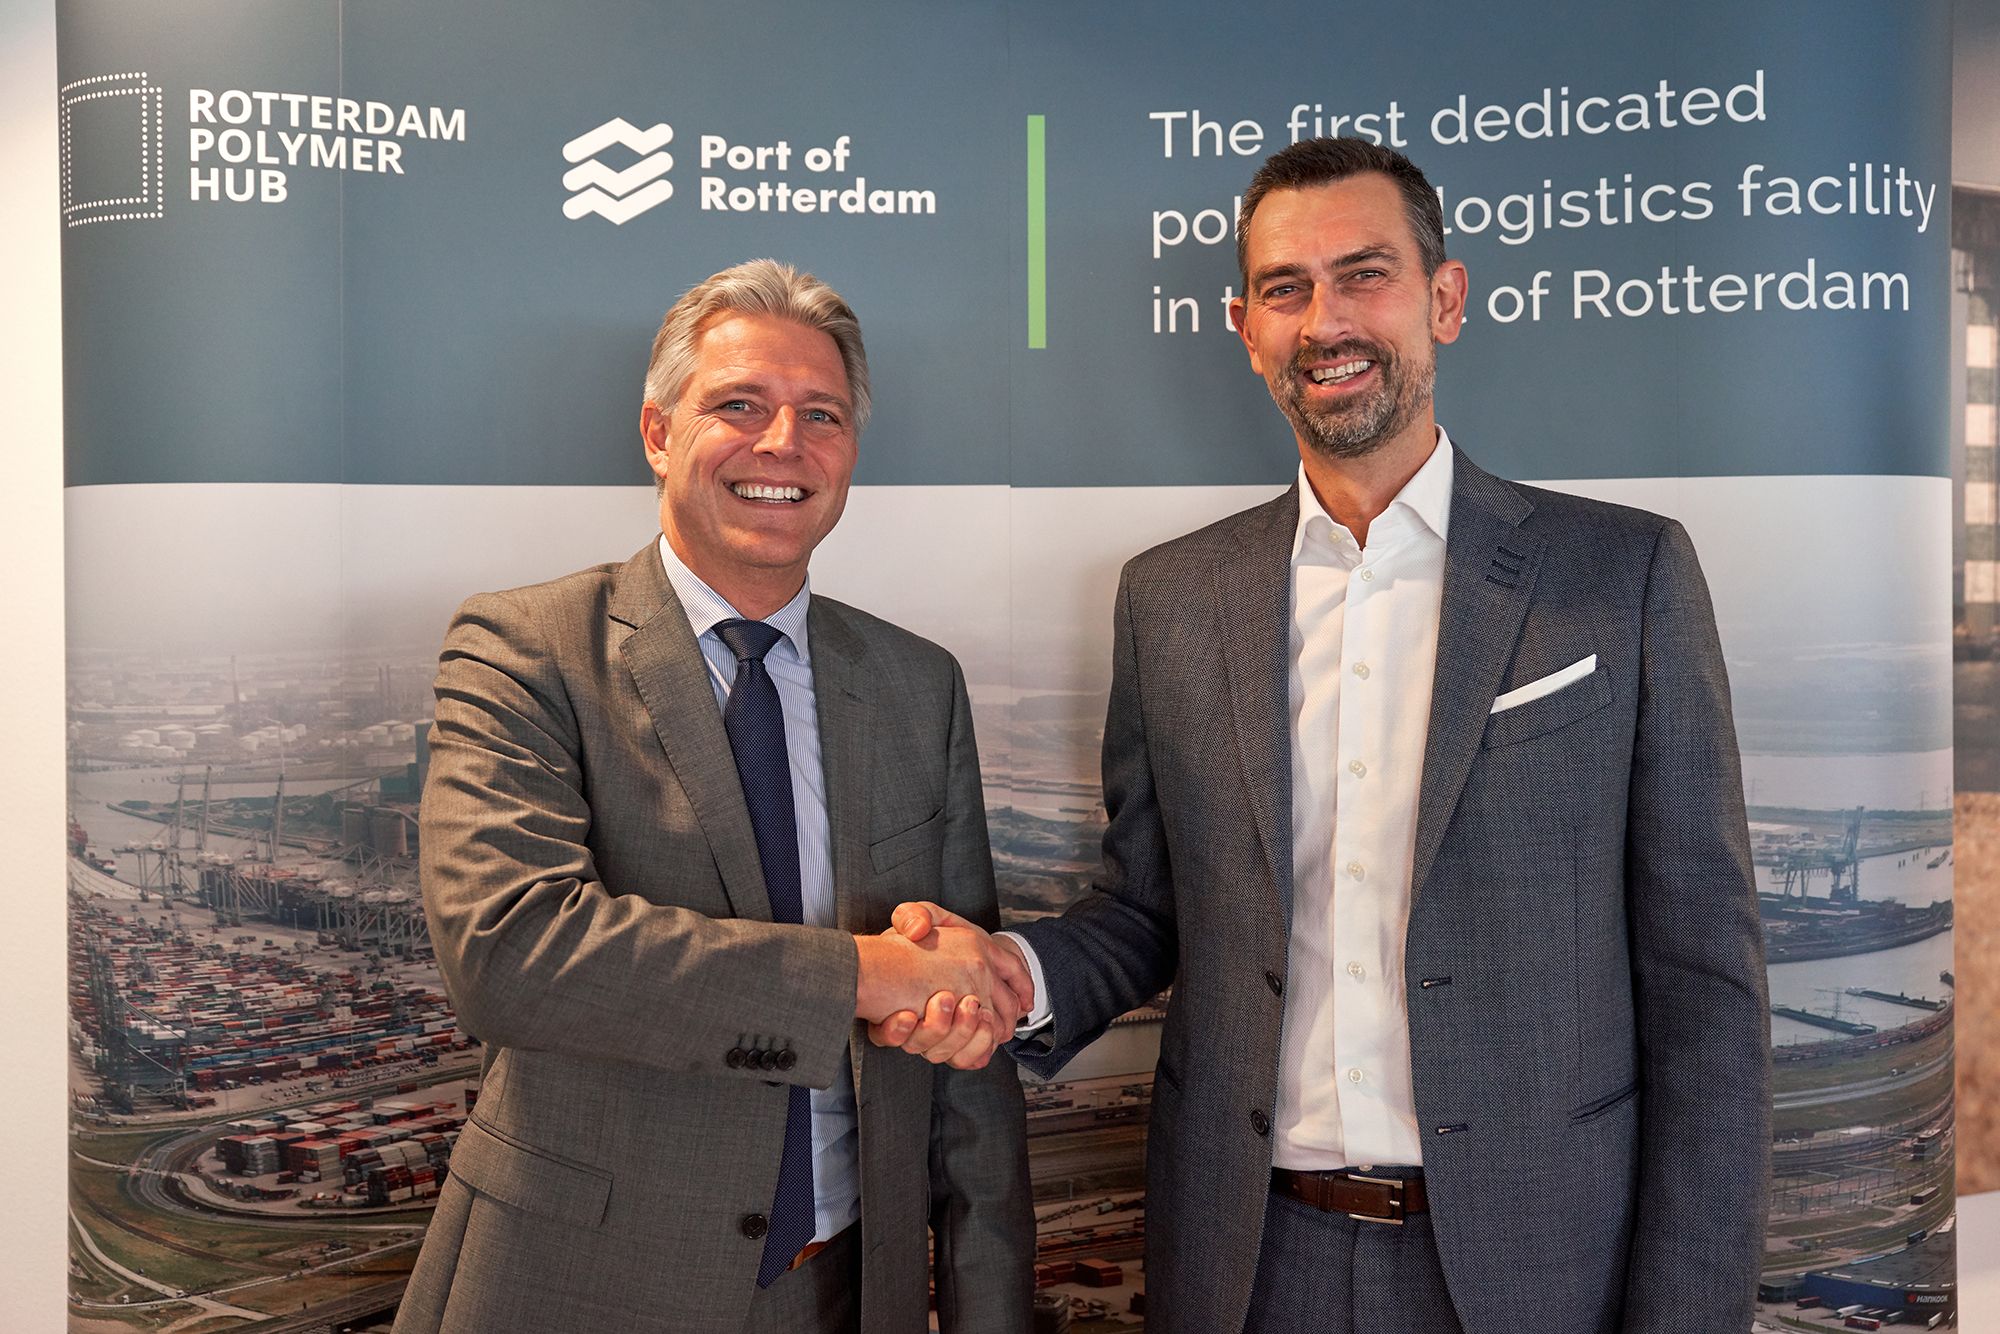 Signing of the agreement for Rotterdam Polymer Hub (RPH)